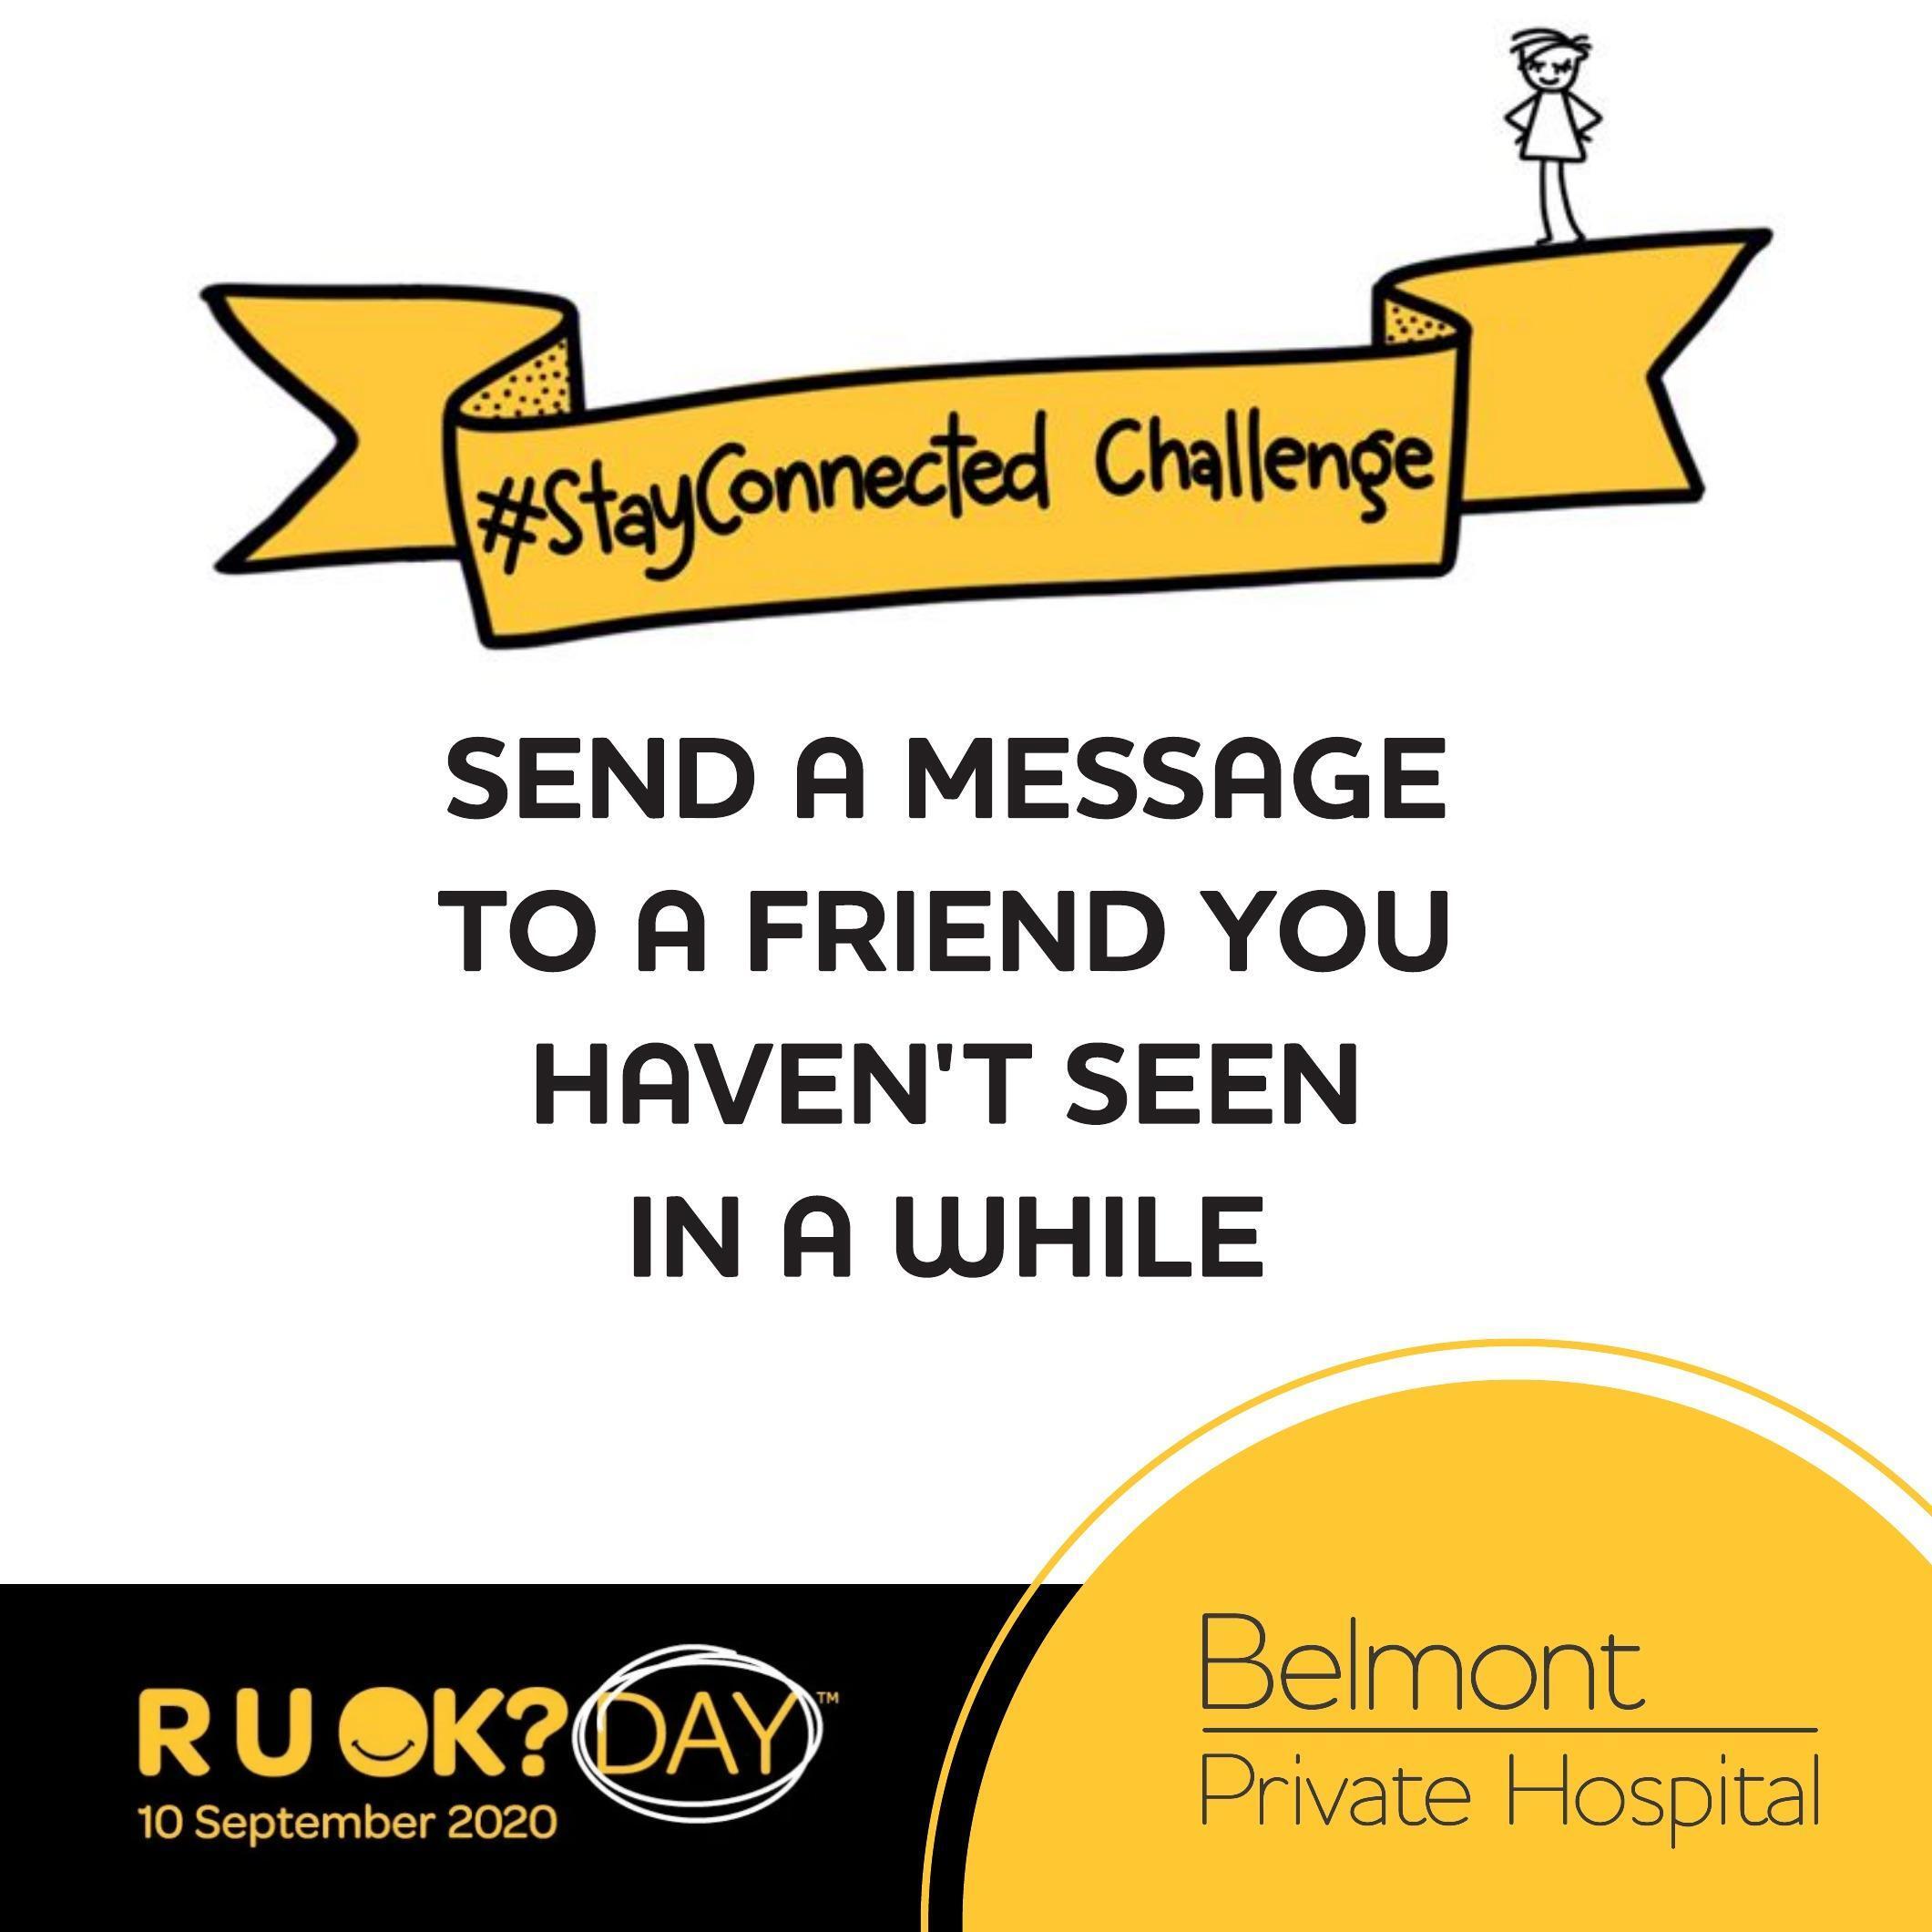 RUOK-DAY_SUICIDE-PREVENTION-2020-TILES-3.jpeg#asset:3853